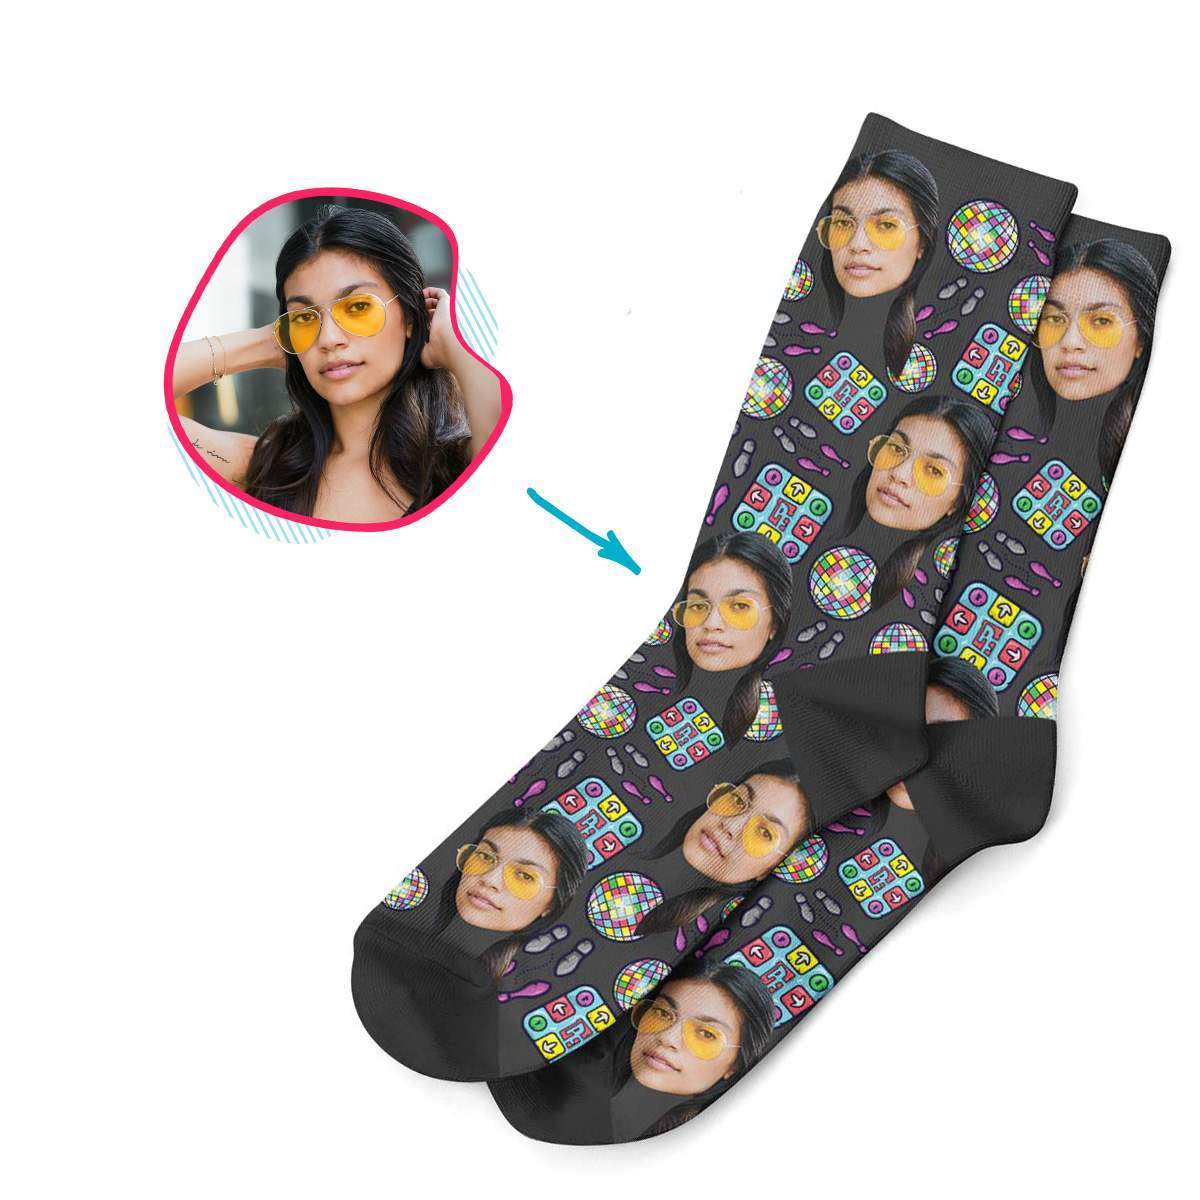 dark Dancing socks personalized with photo of face printed on them